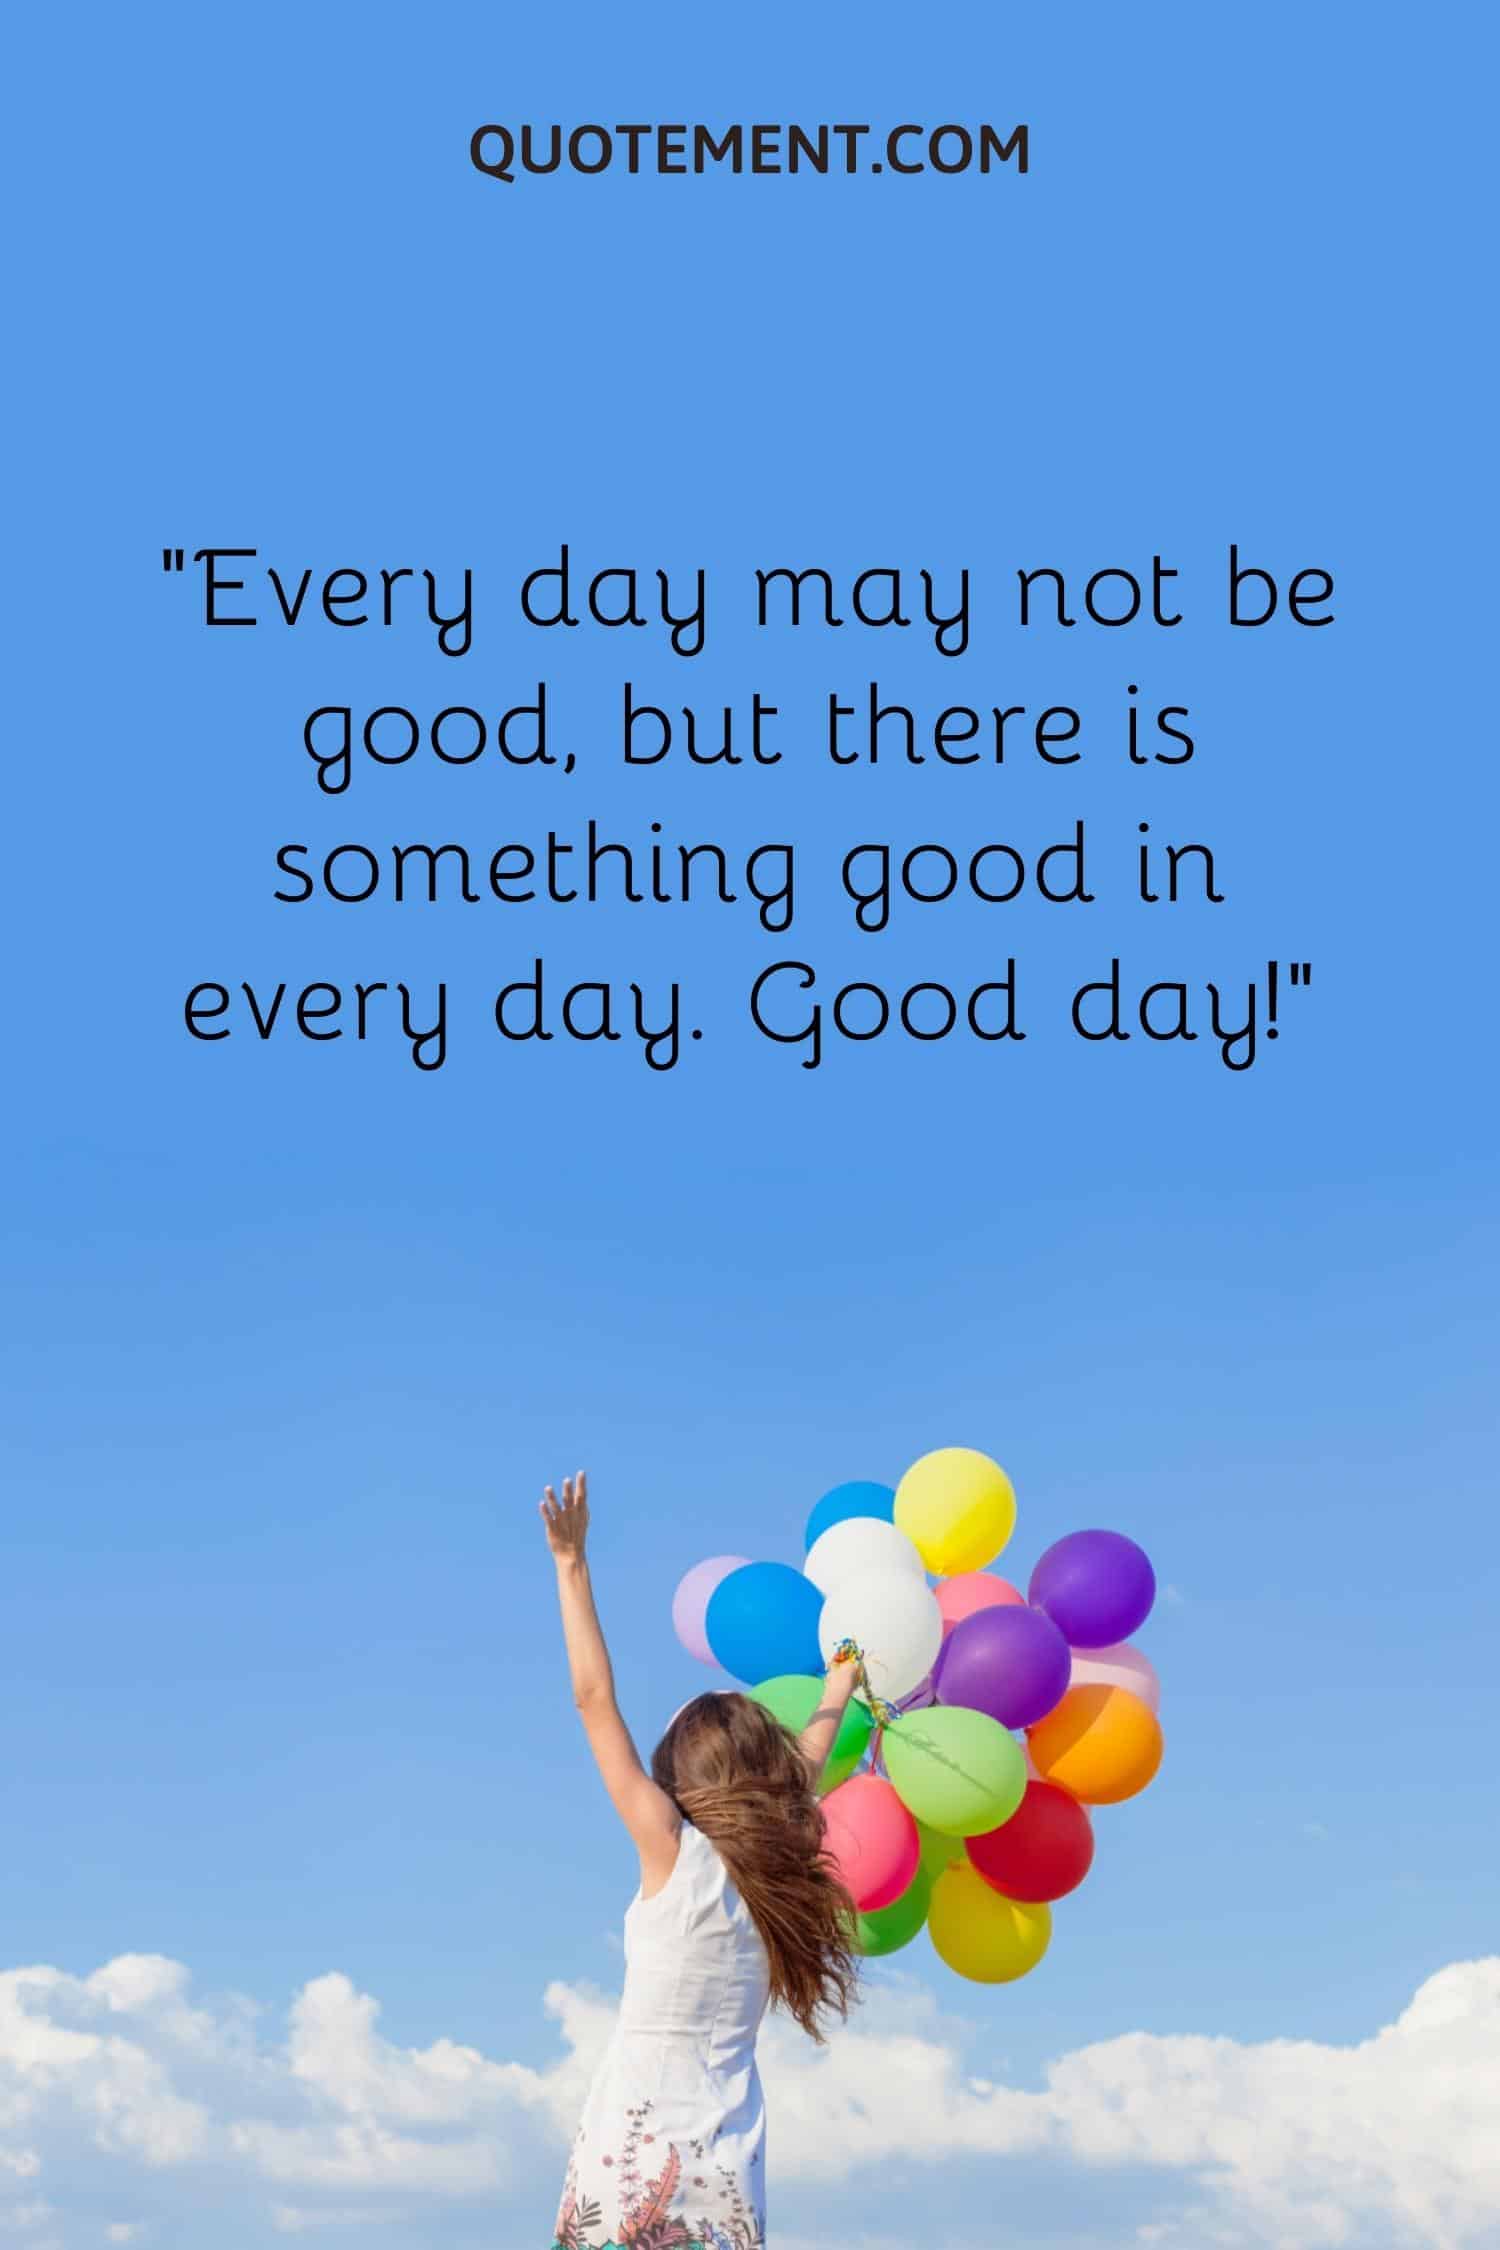 Every day may not be good, but there is something good in every day. Good day